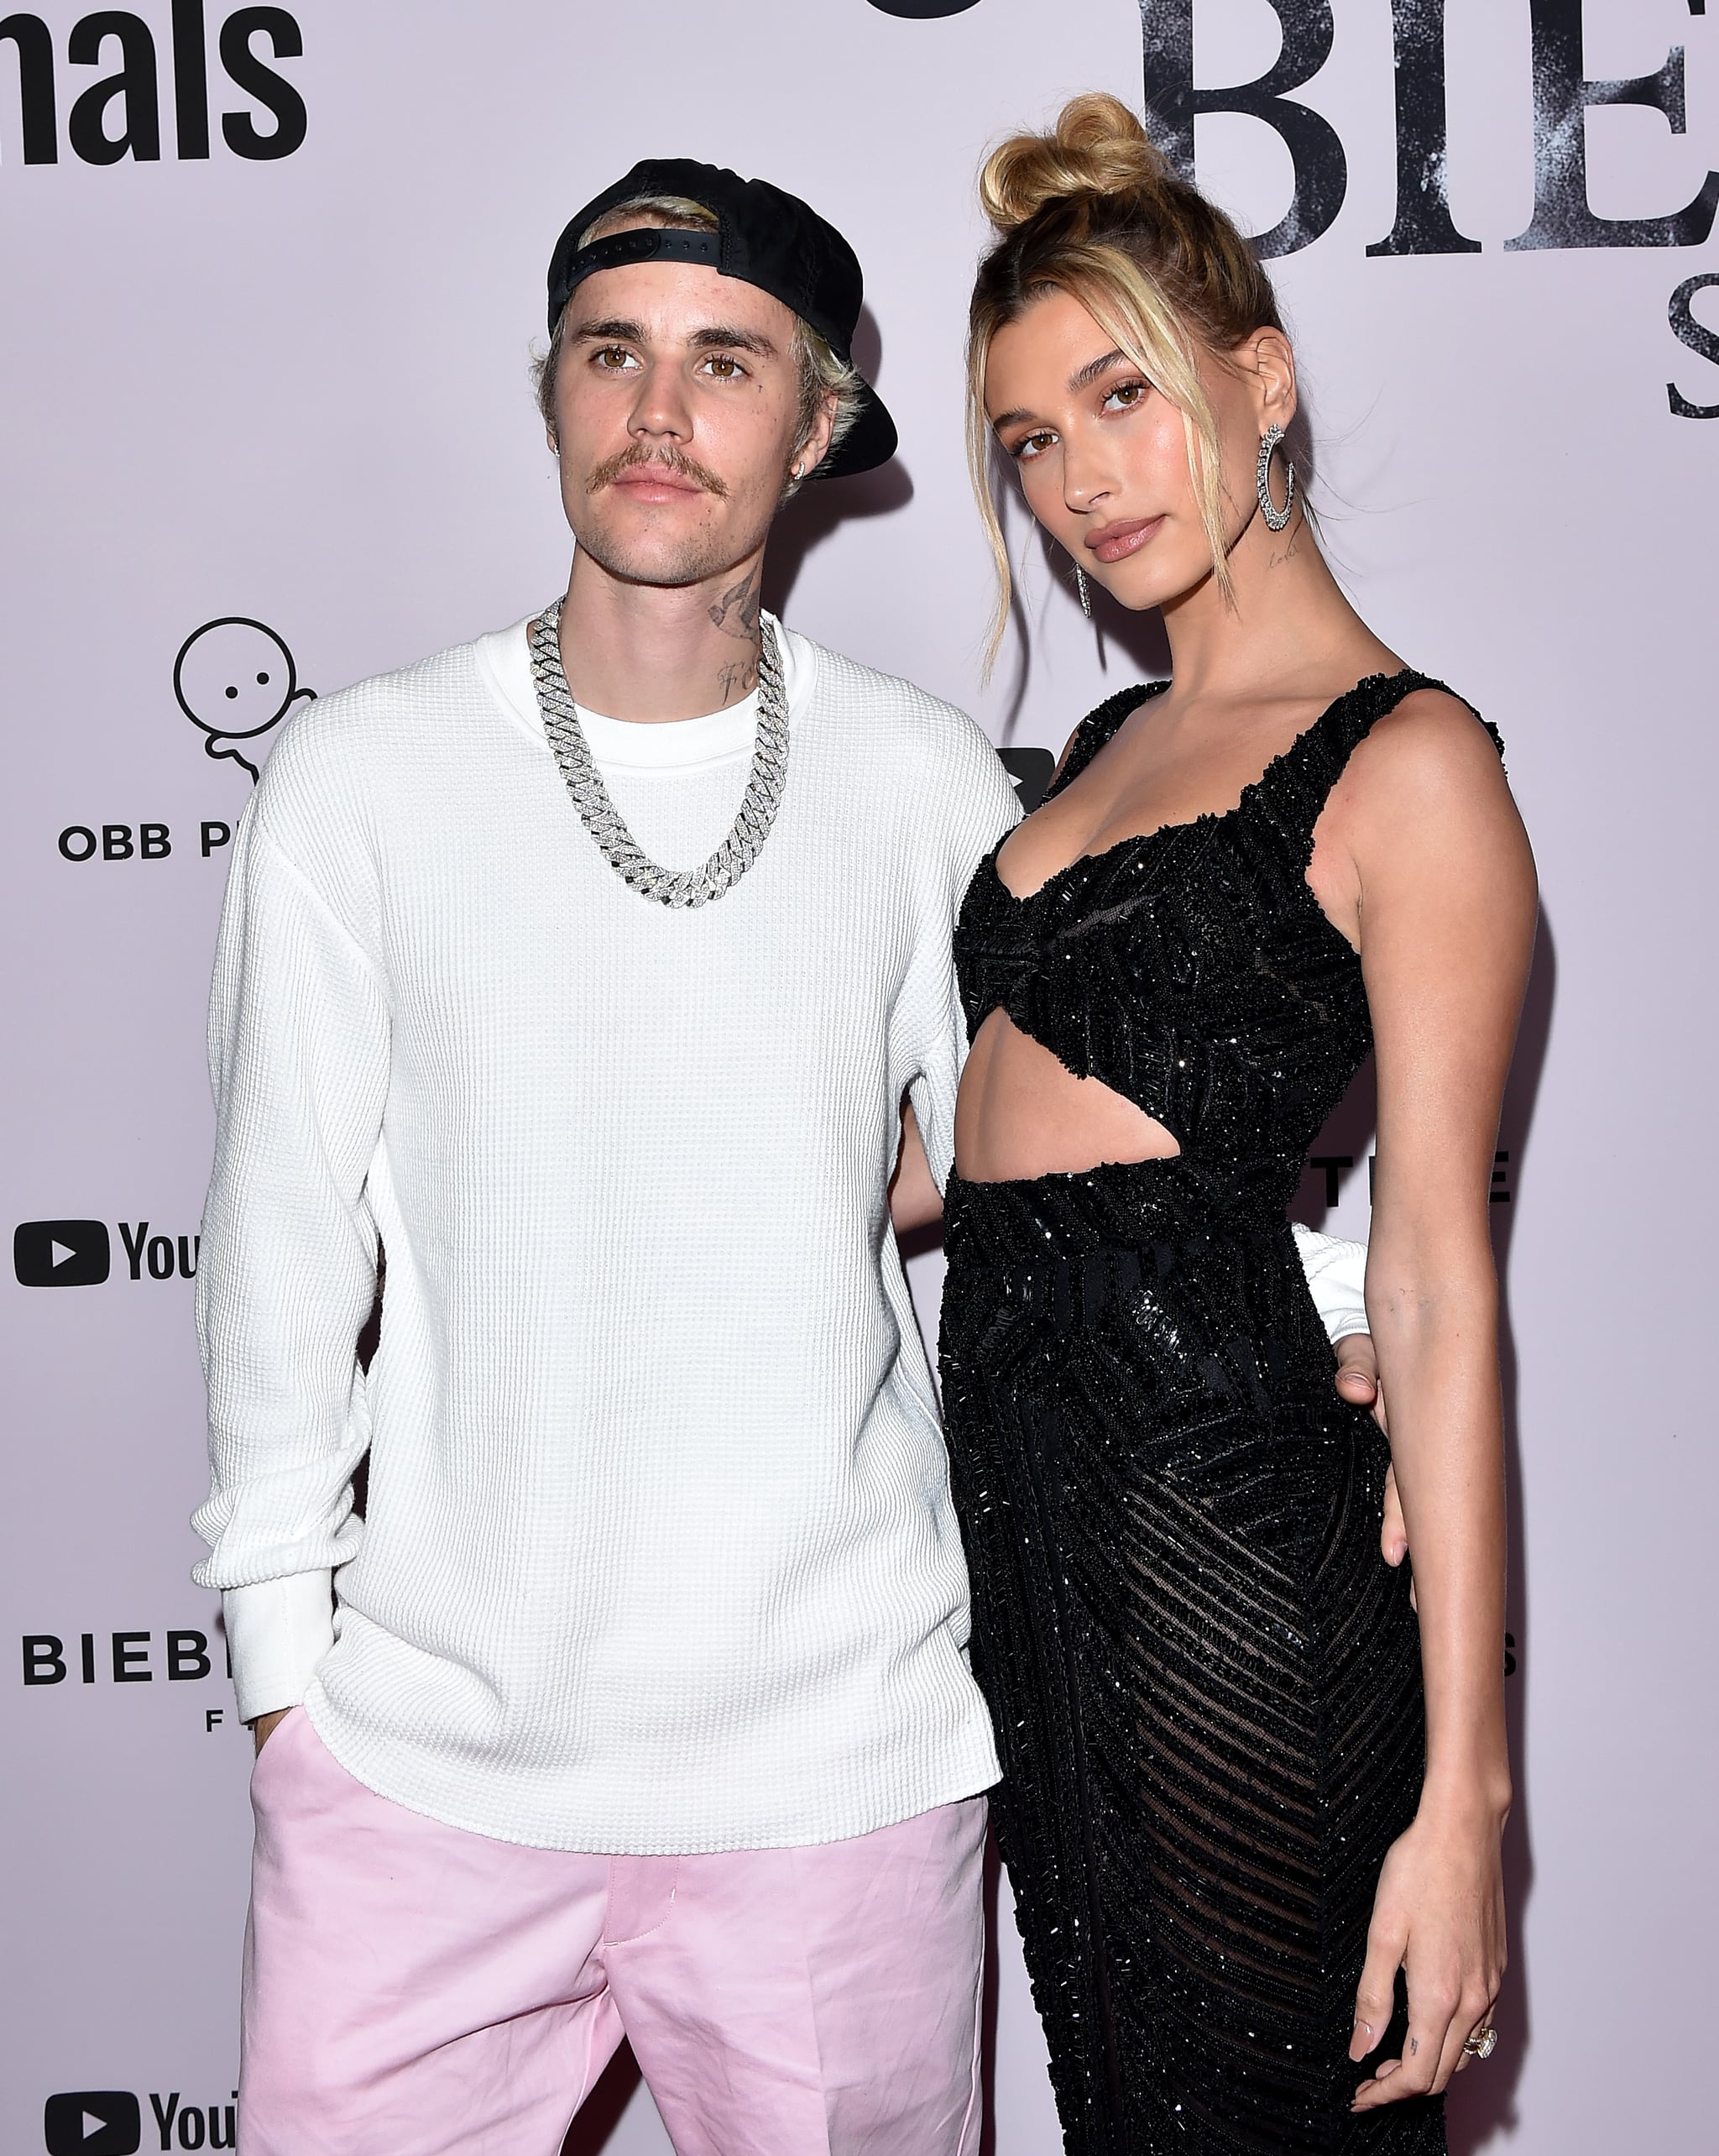 LOS ANGELES, CALIFORNIA - JANUARY 27: Justin Bieber and Hailey Bieber attend the Premiere of YouTube Original's 